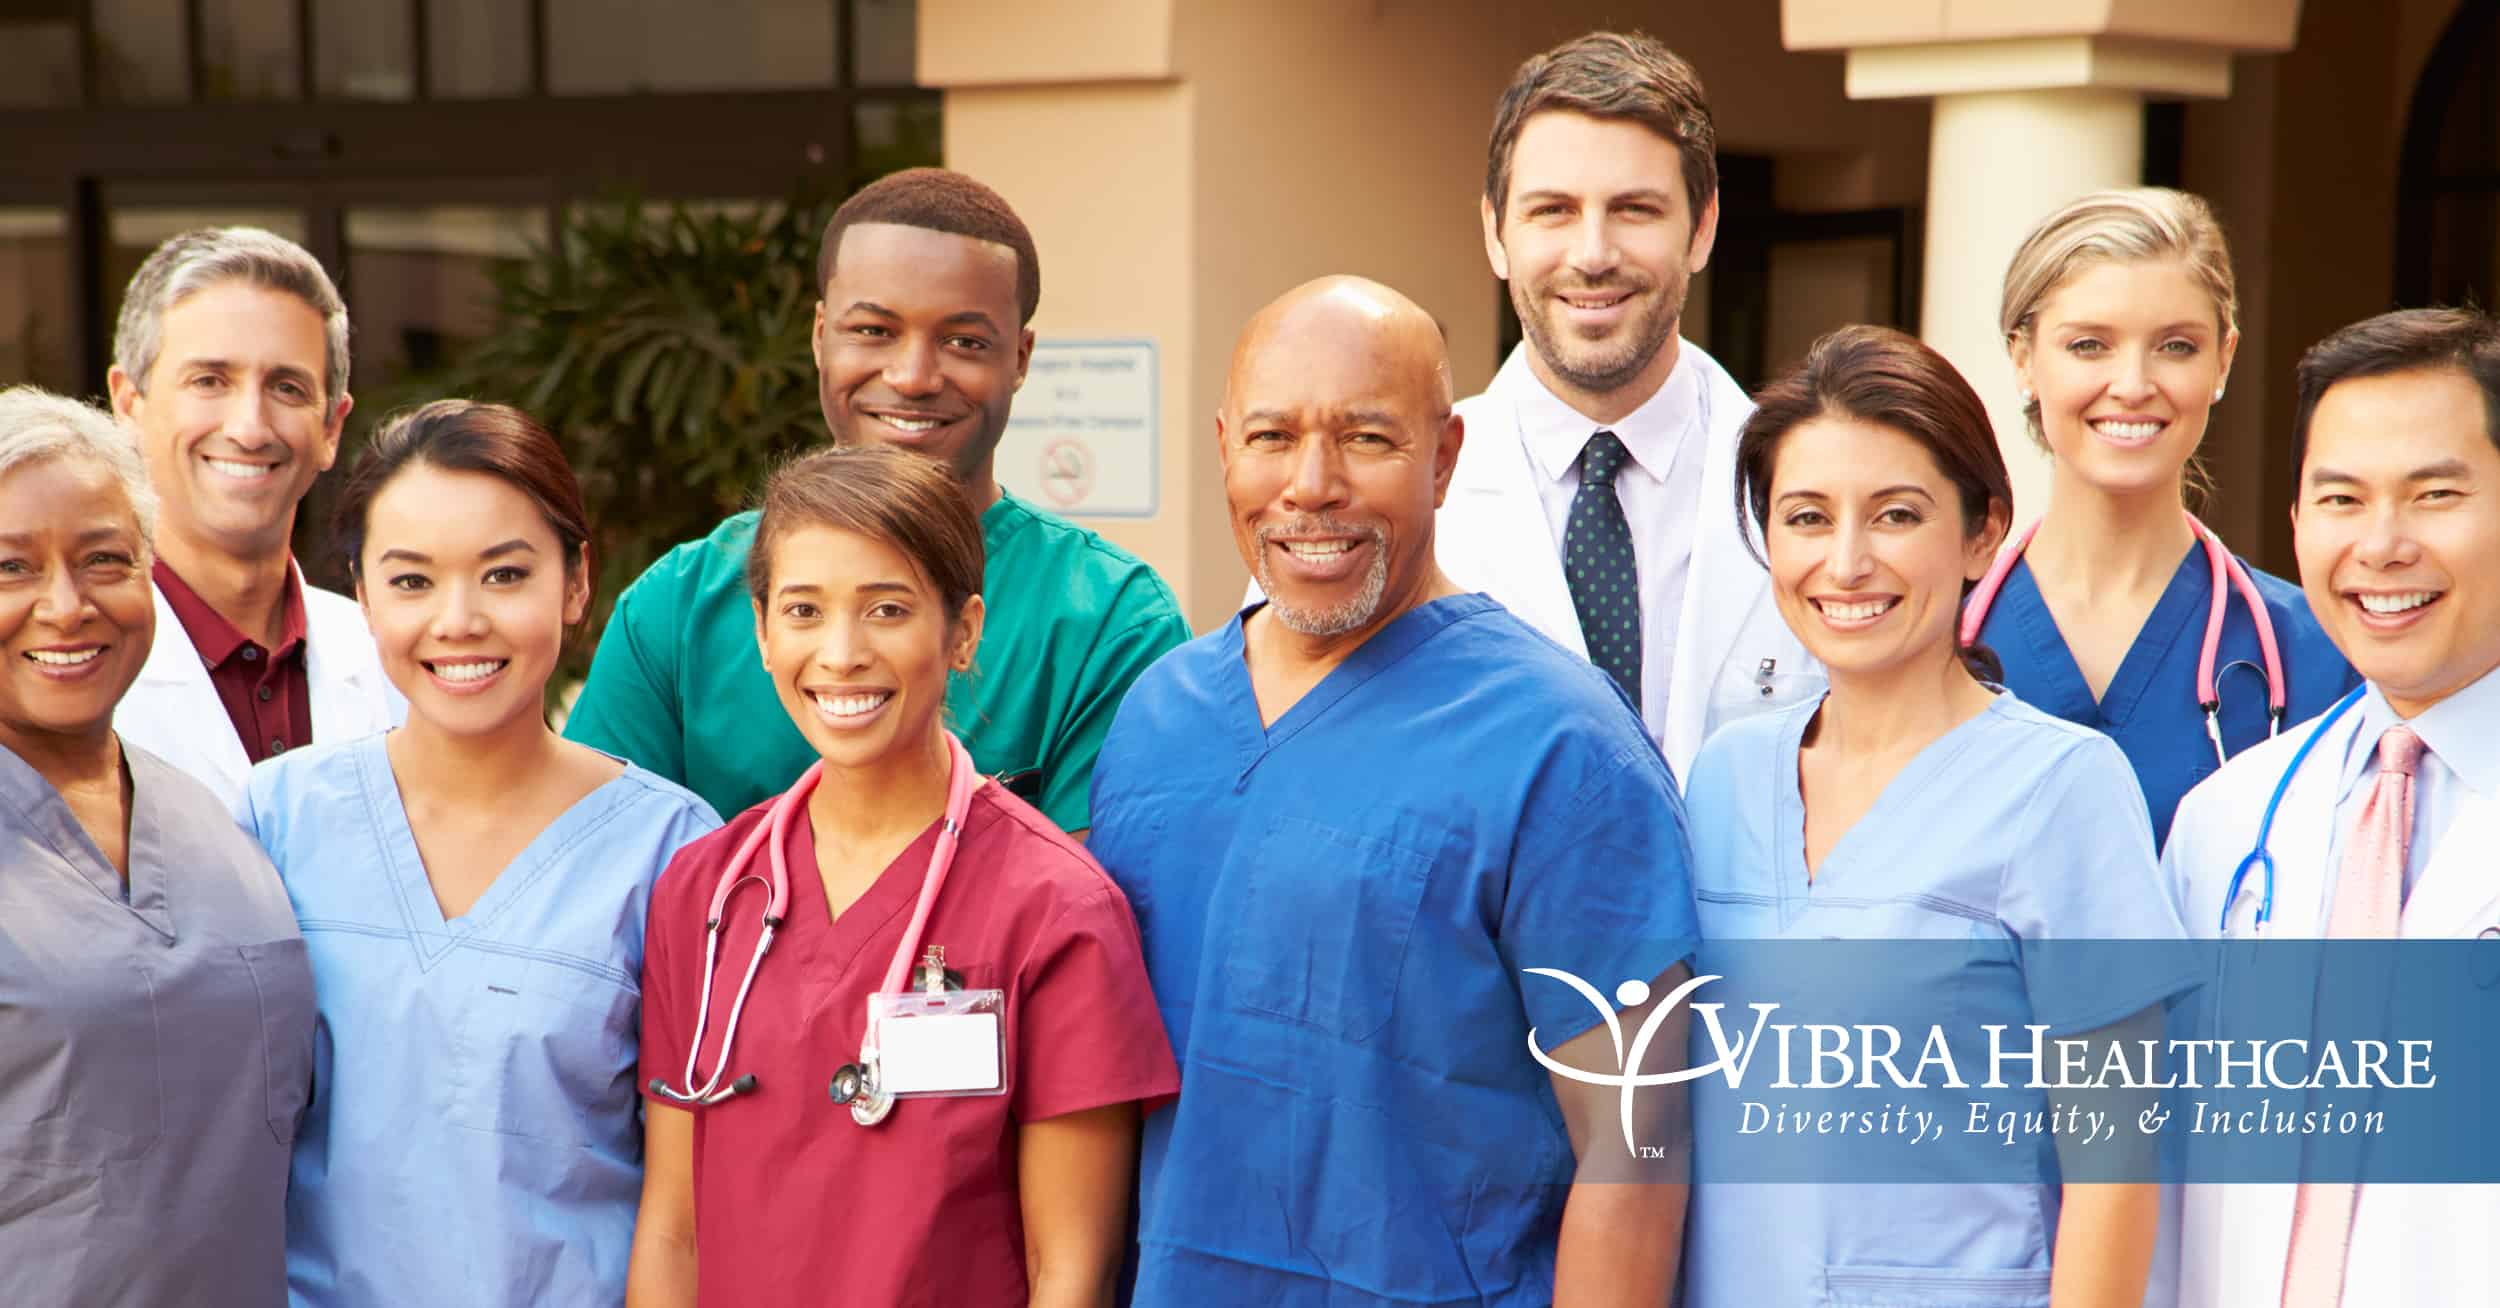 2020 Diversity, Equity, and Inclusion Report | Vibra Healthcare